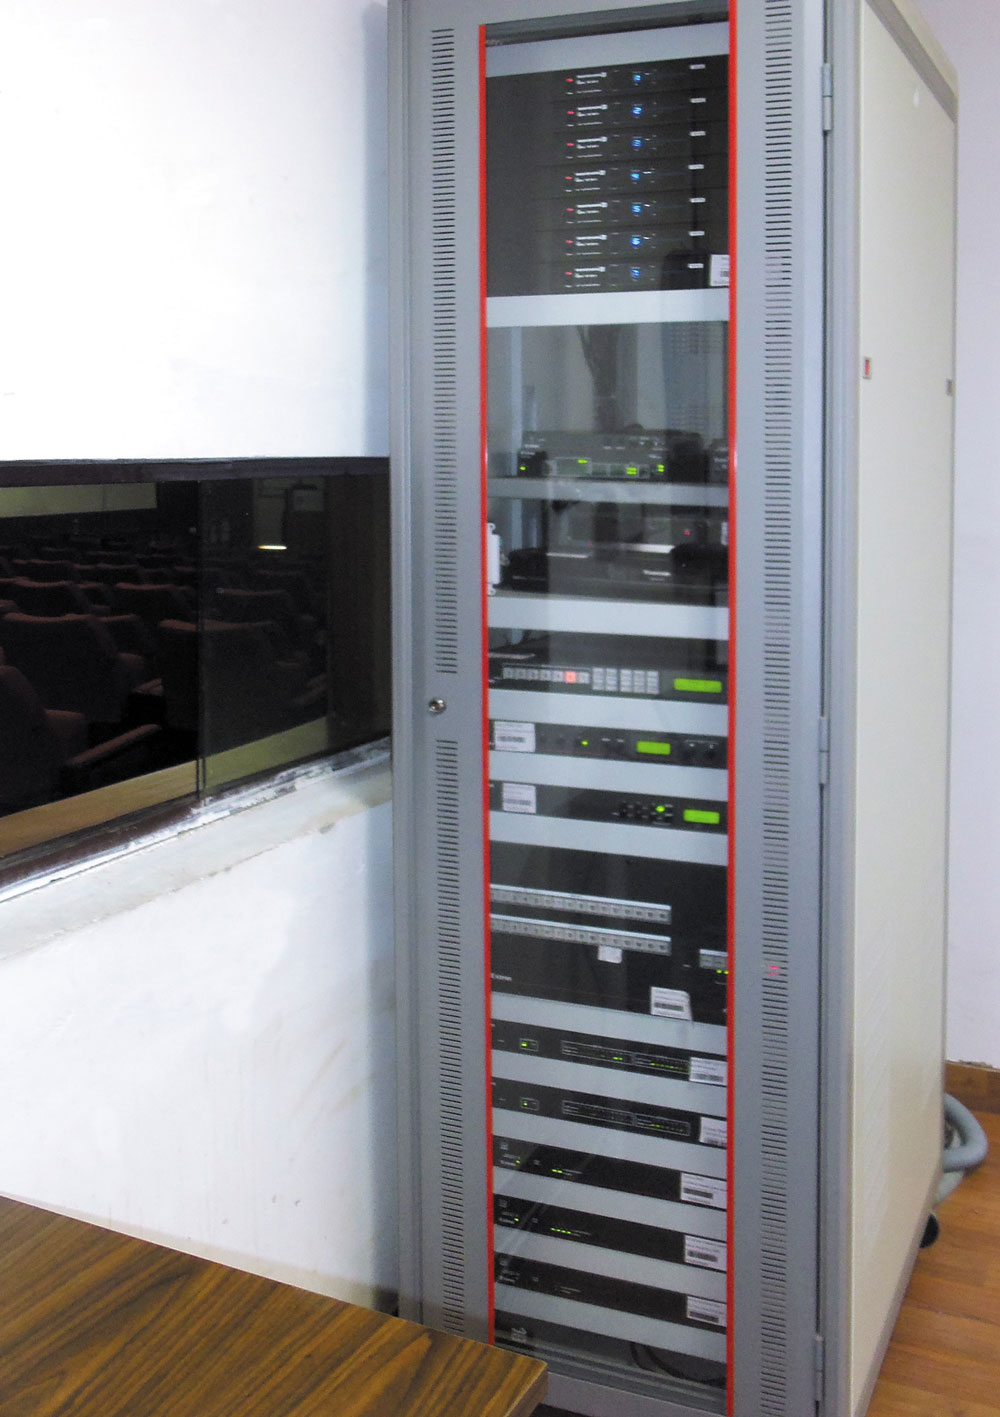 A single equipment rack in the control room houses most of the AV equipment for the auditorium, conference room, and training room.